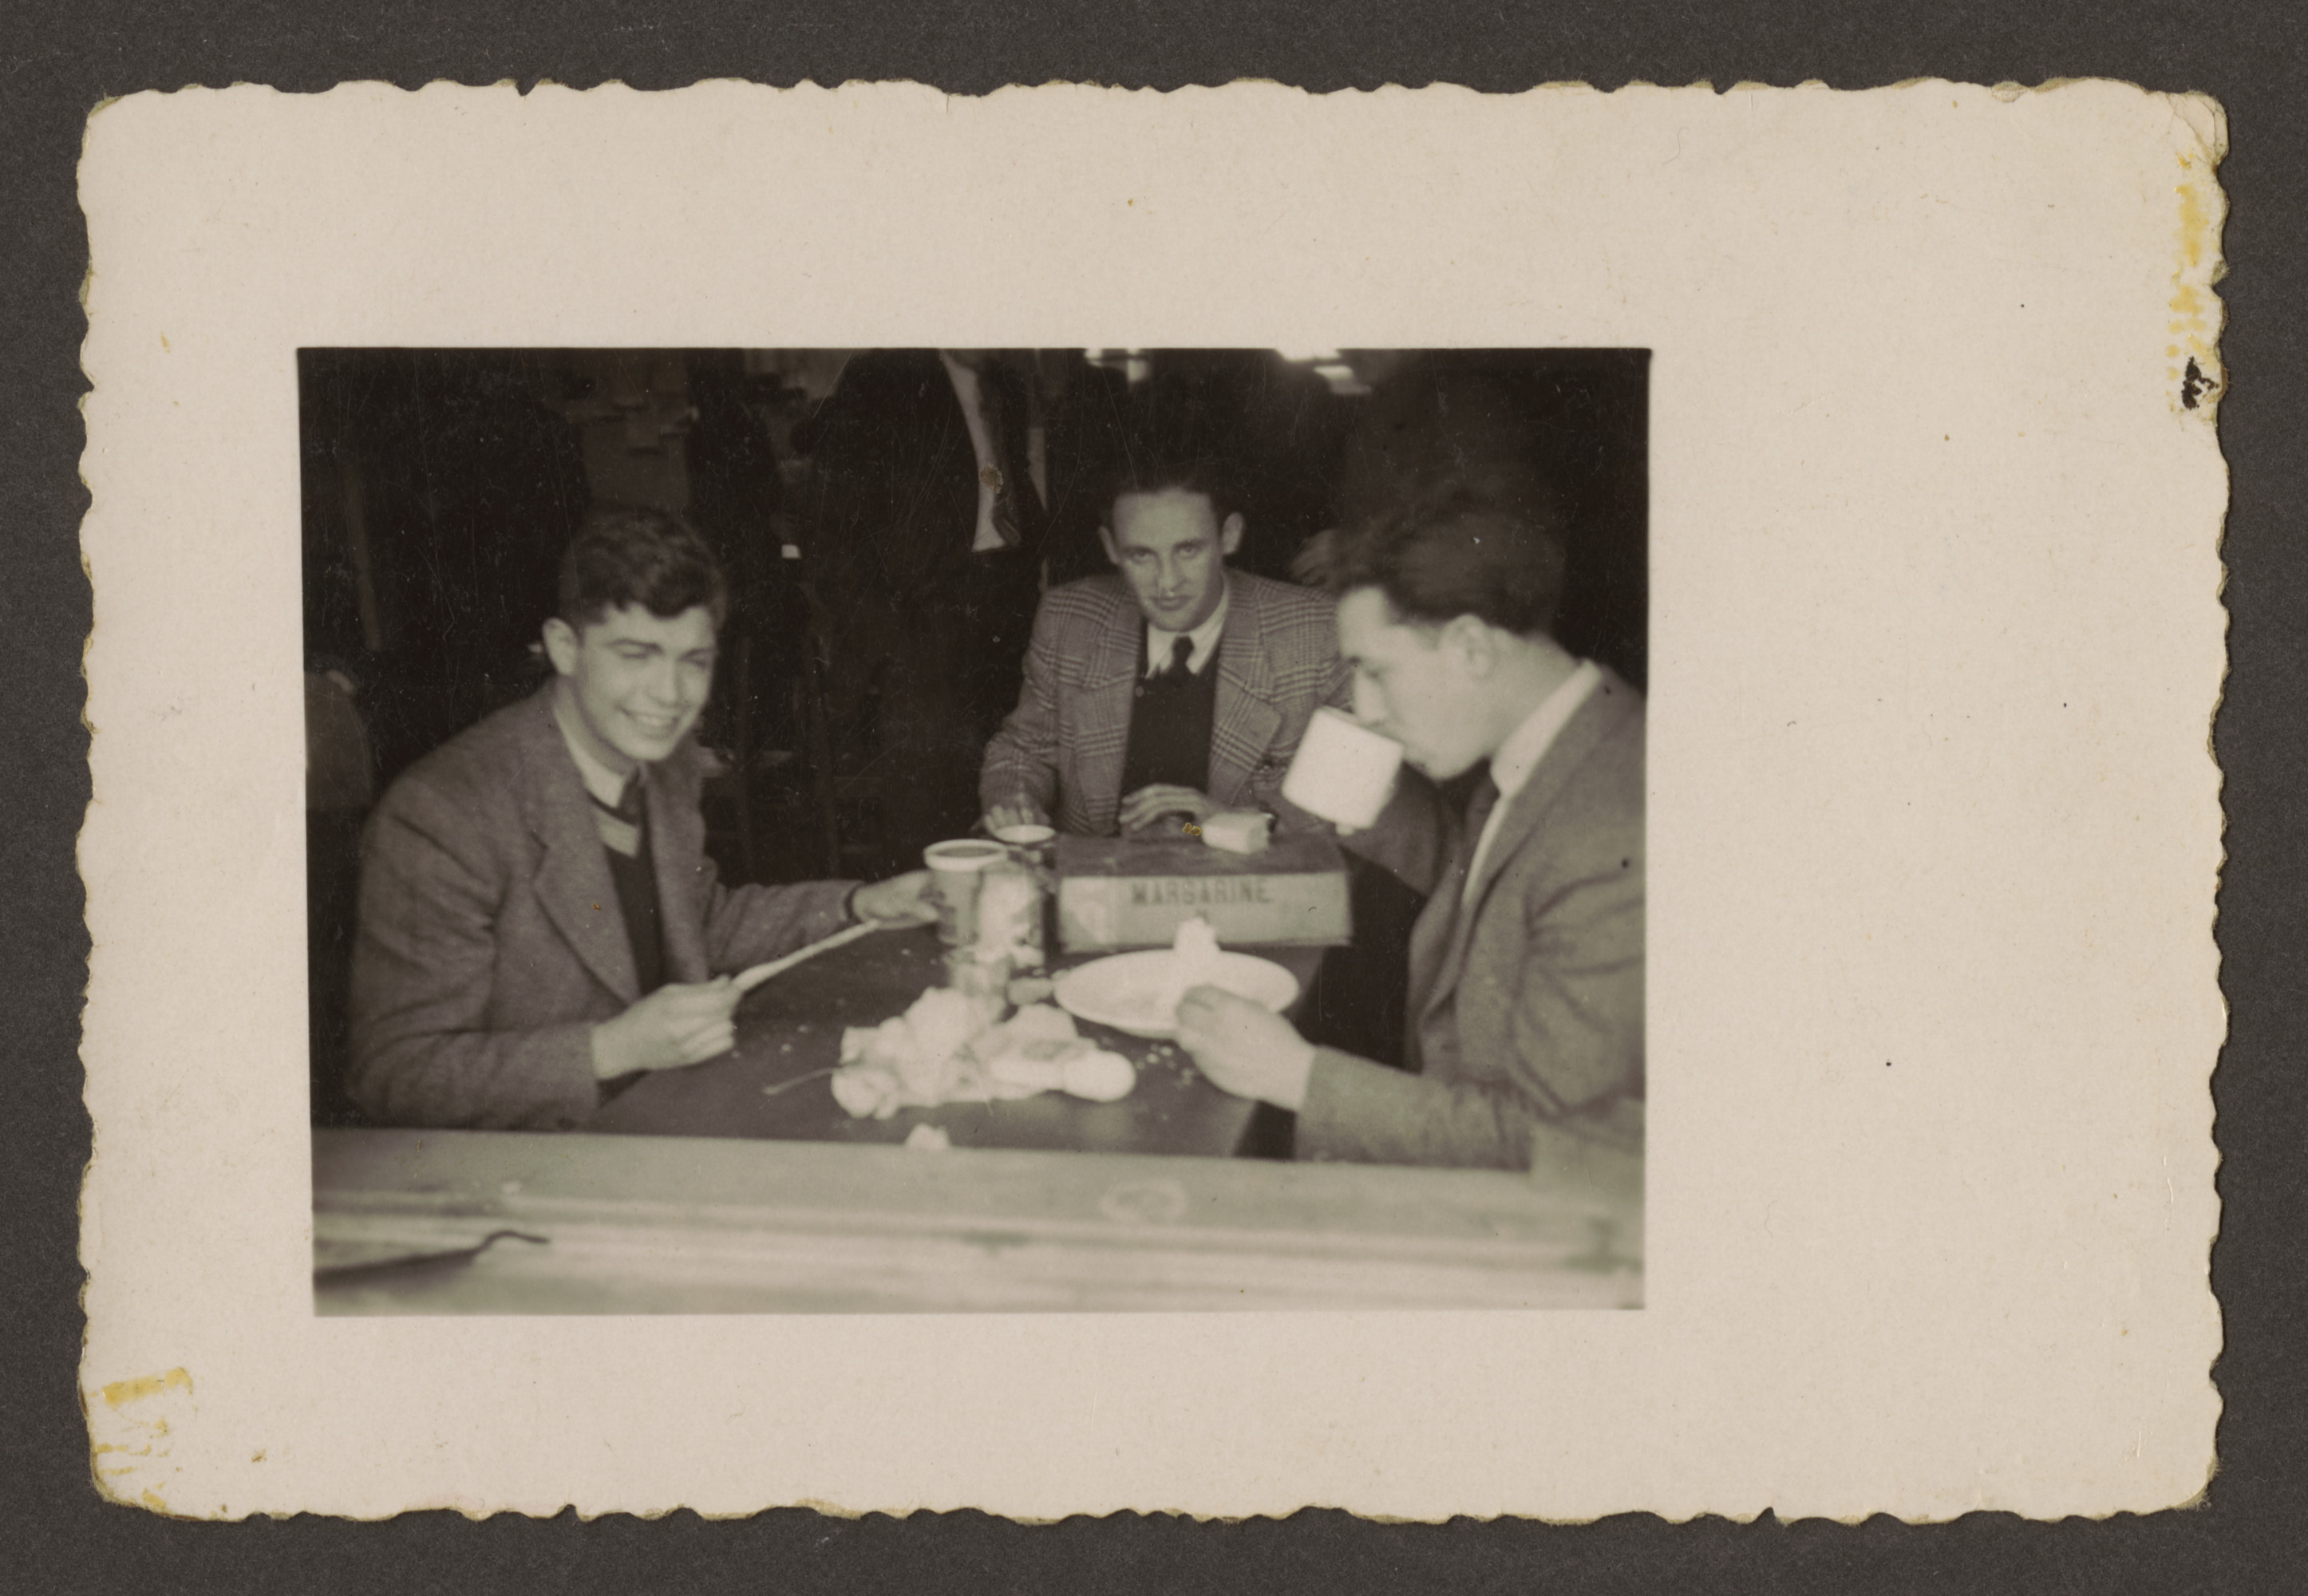 A group of friends meets for a cup of coffee in the Westerbork transit camp.

Among those pictured are Erich Rosendahl (far right) and Werner Lederman (far left).